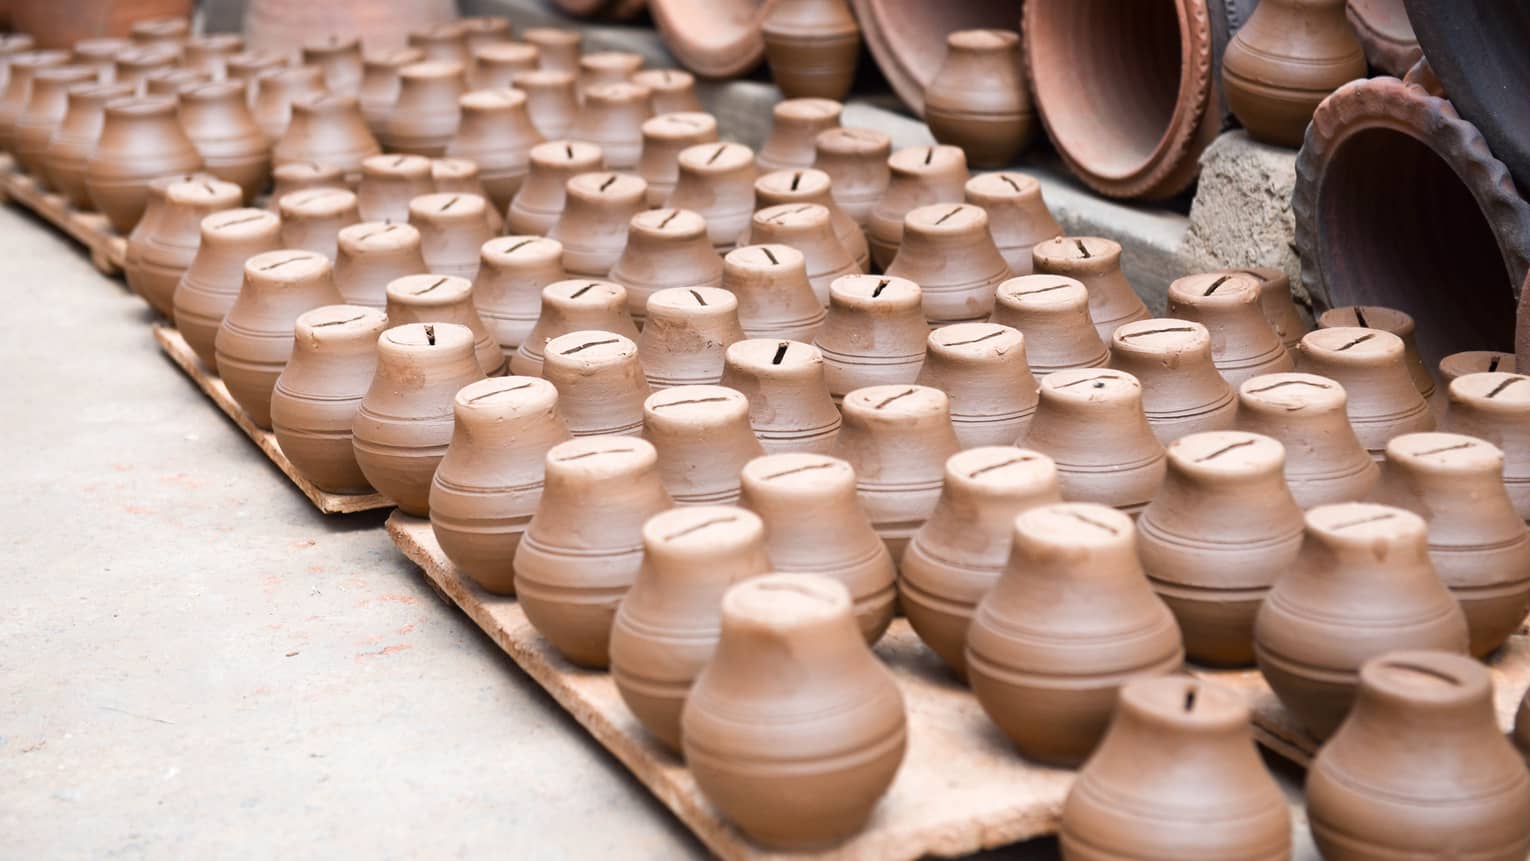 A collection of small, brown clay piggy banks neatly arranged on wooden pallets, surrounded by larger pottery items in the background, creating a display of handcrafted ceramics.